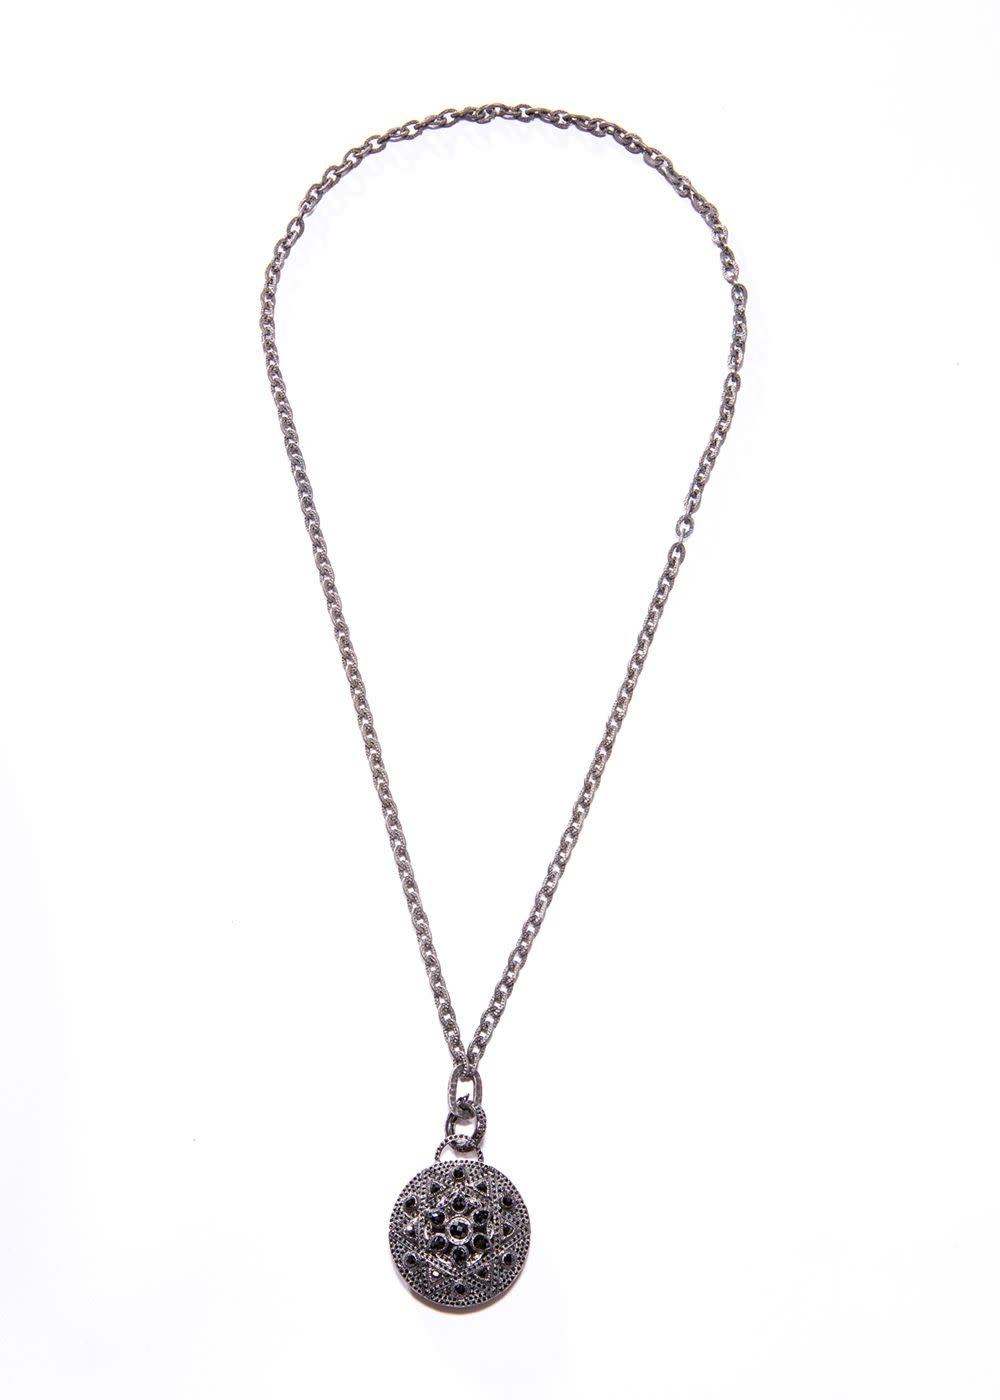 Rhodium Plated Sterling Hammered Medium GV Chain w/ Oxidized Sterling & Black Spinel Pendant (30